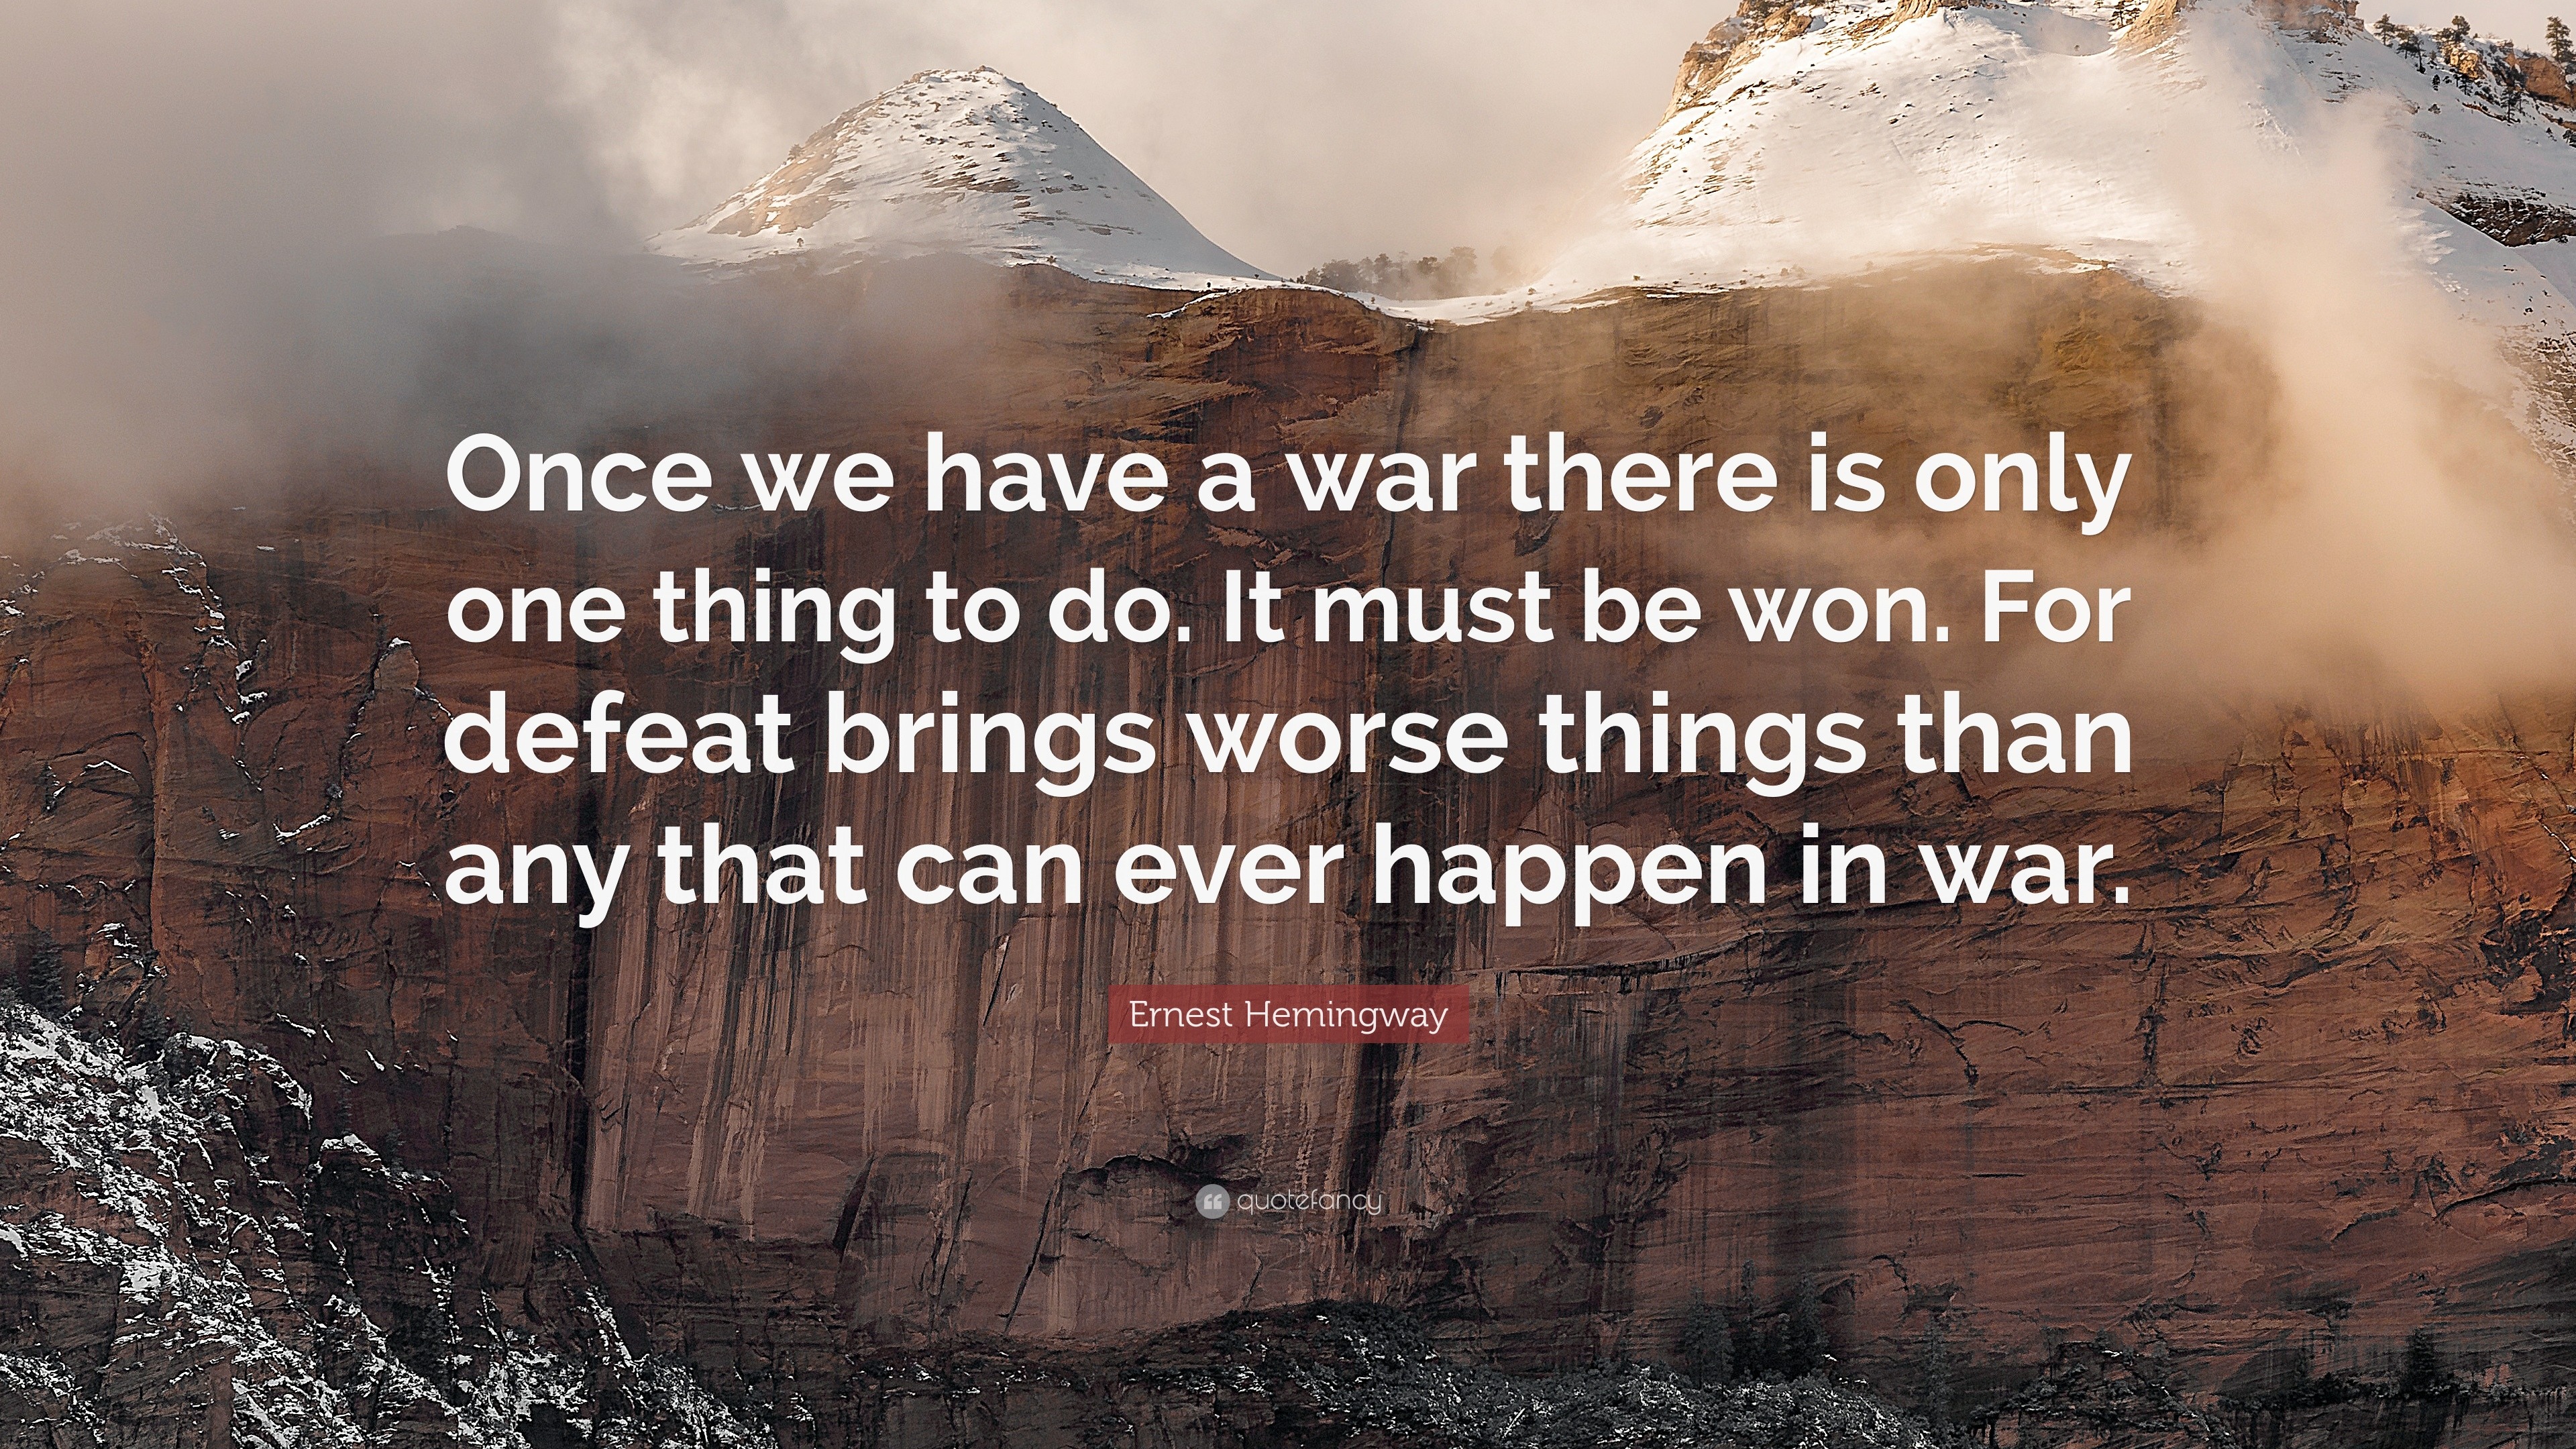 Ernest Hemingway Quote: “Once we have a war there is only one thing to ...